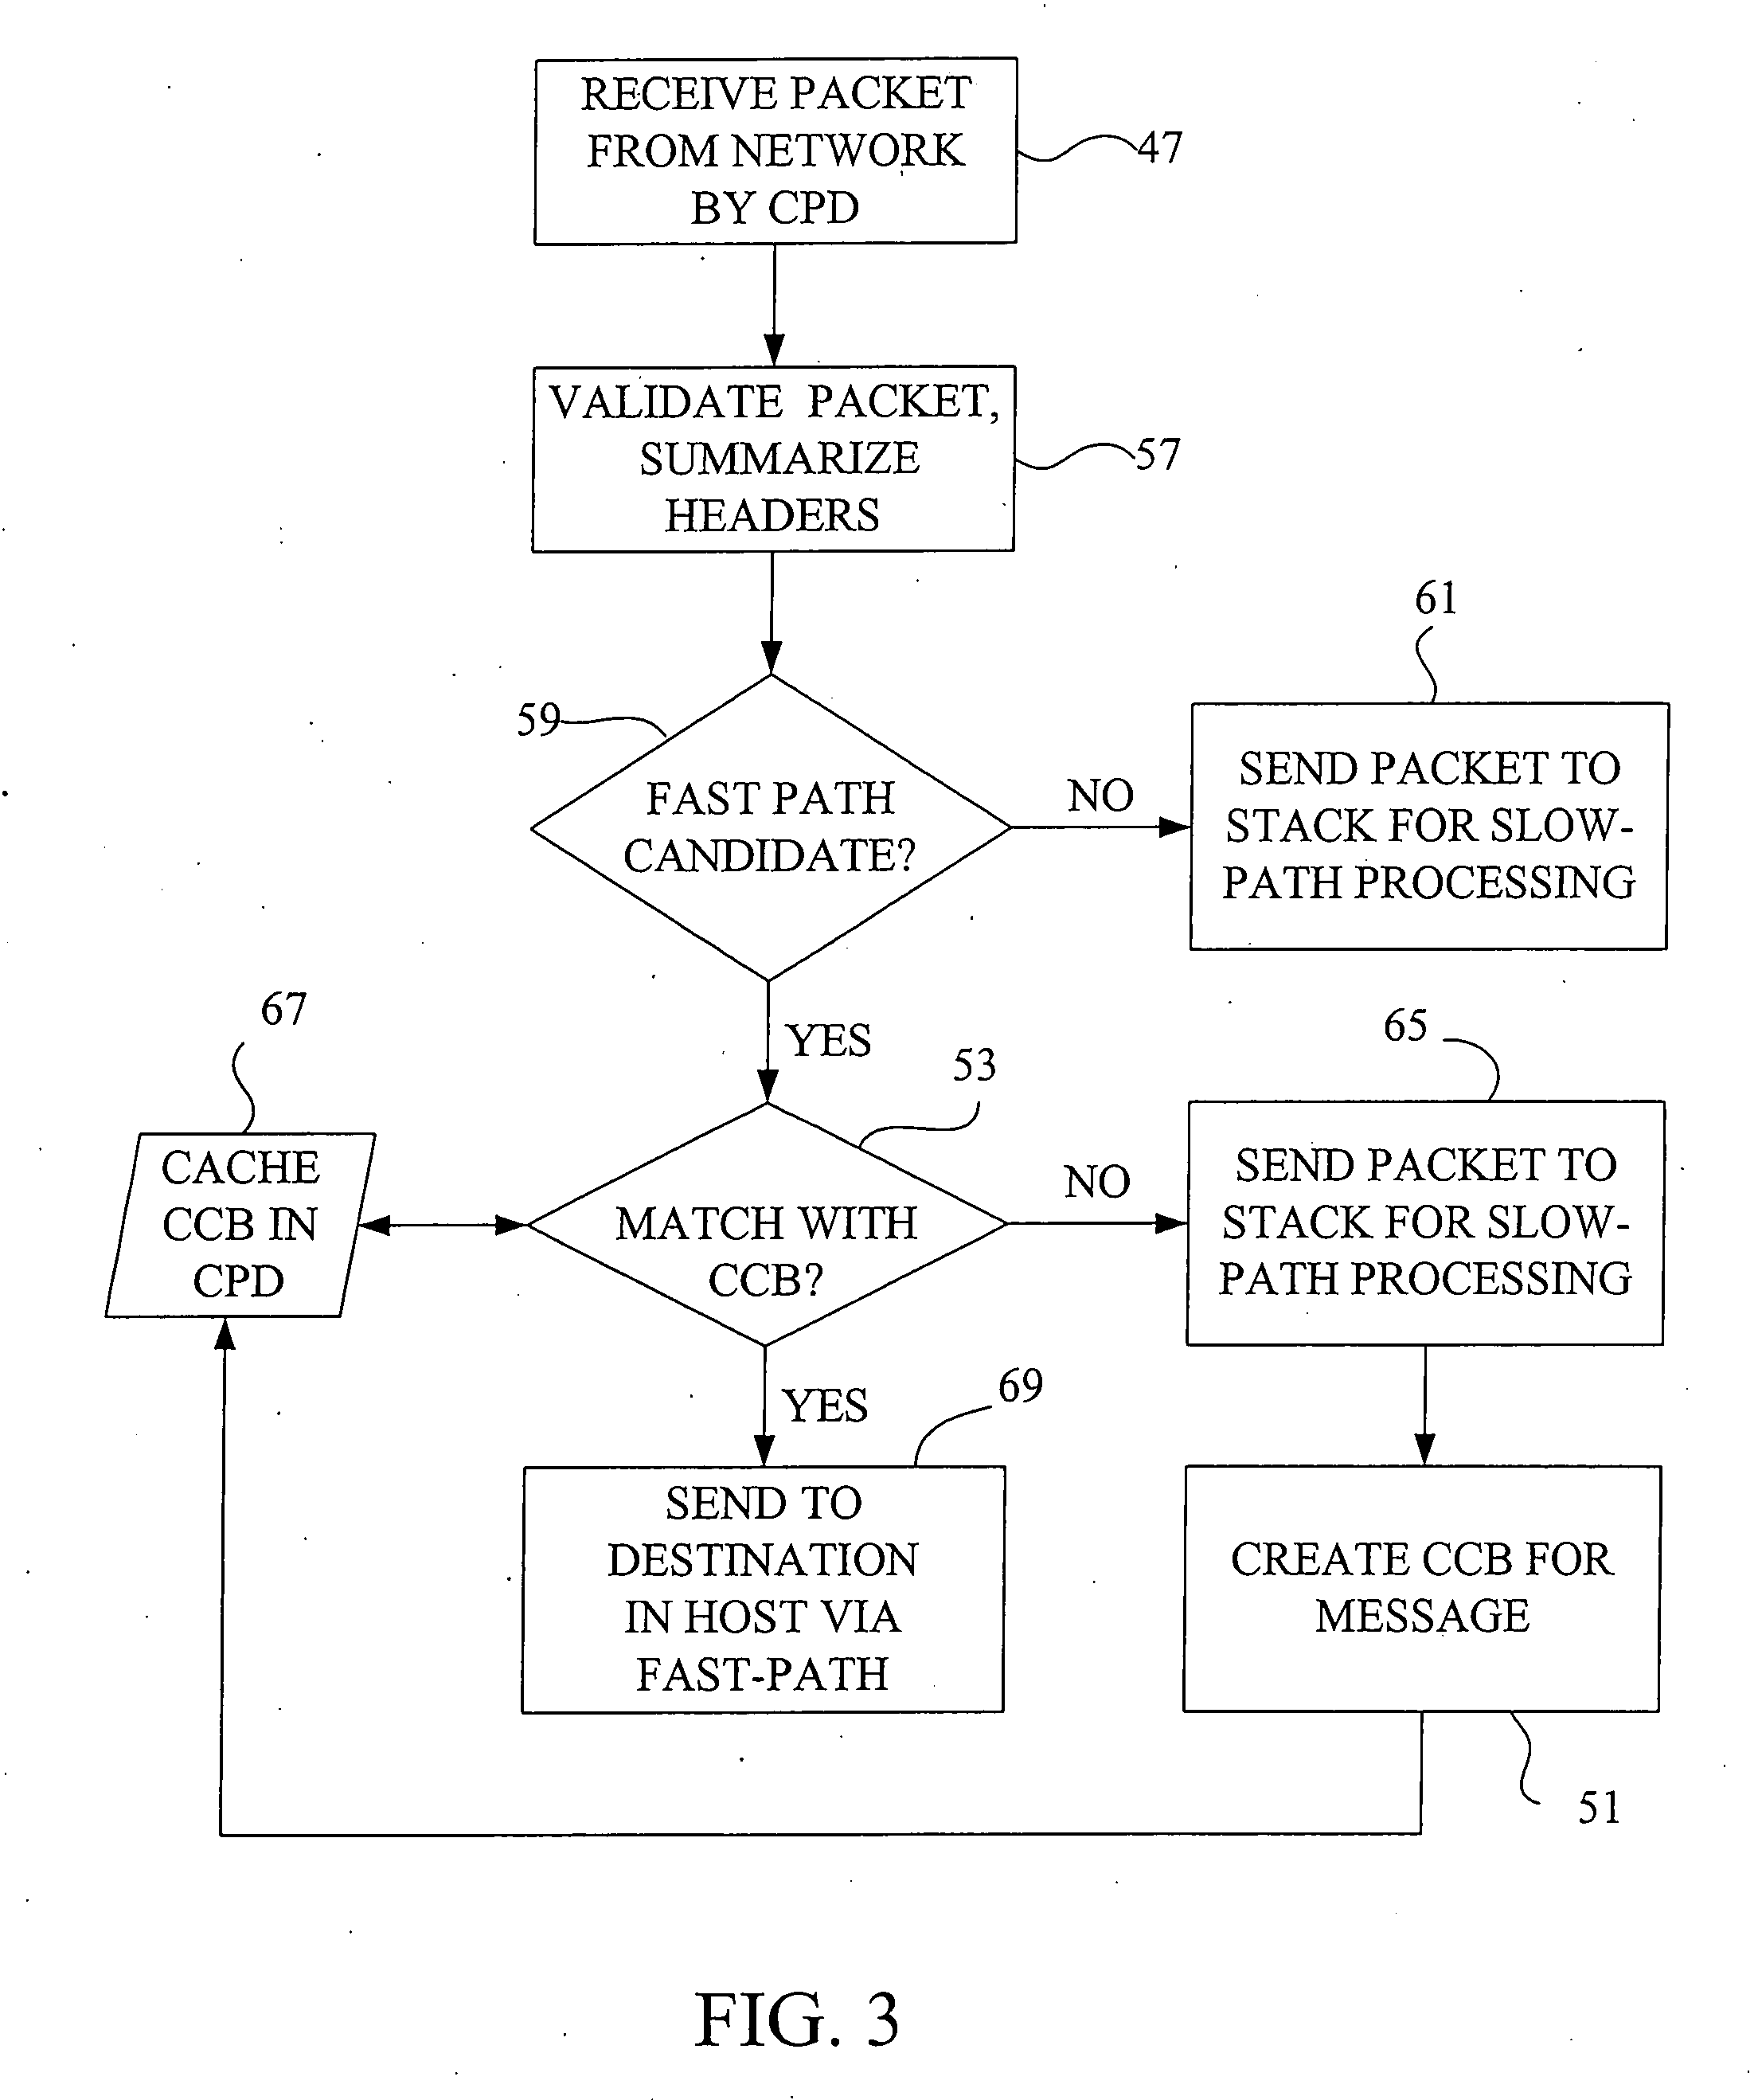 Fast-path apparatus for transmitting data corresponding to a TCP connection